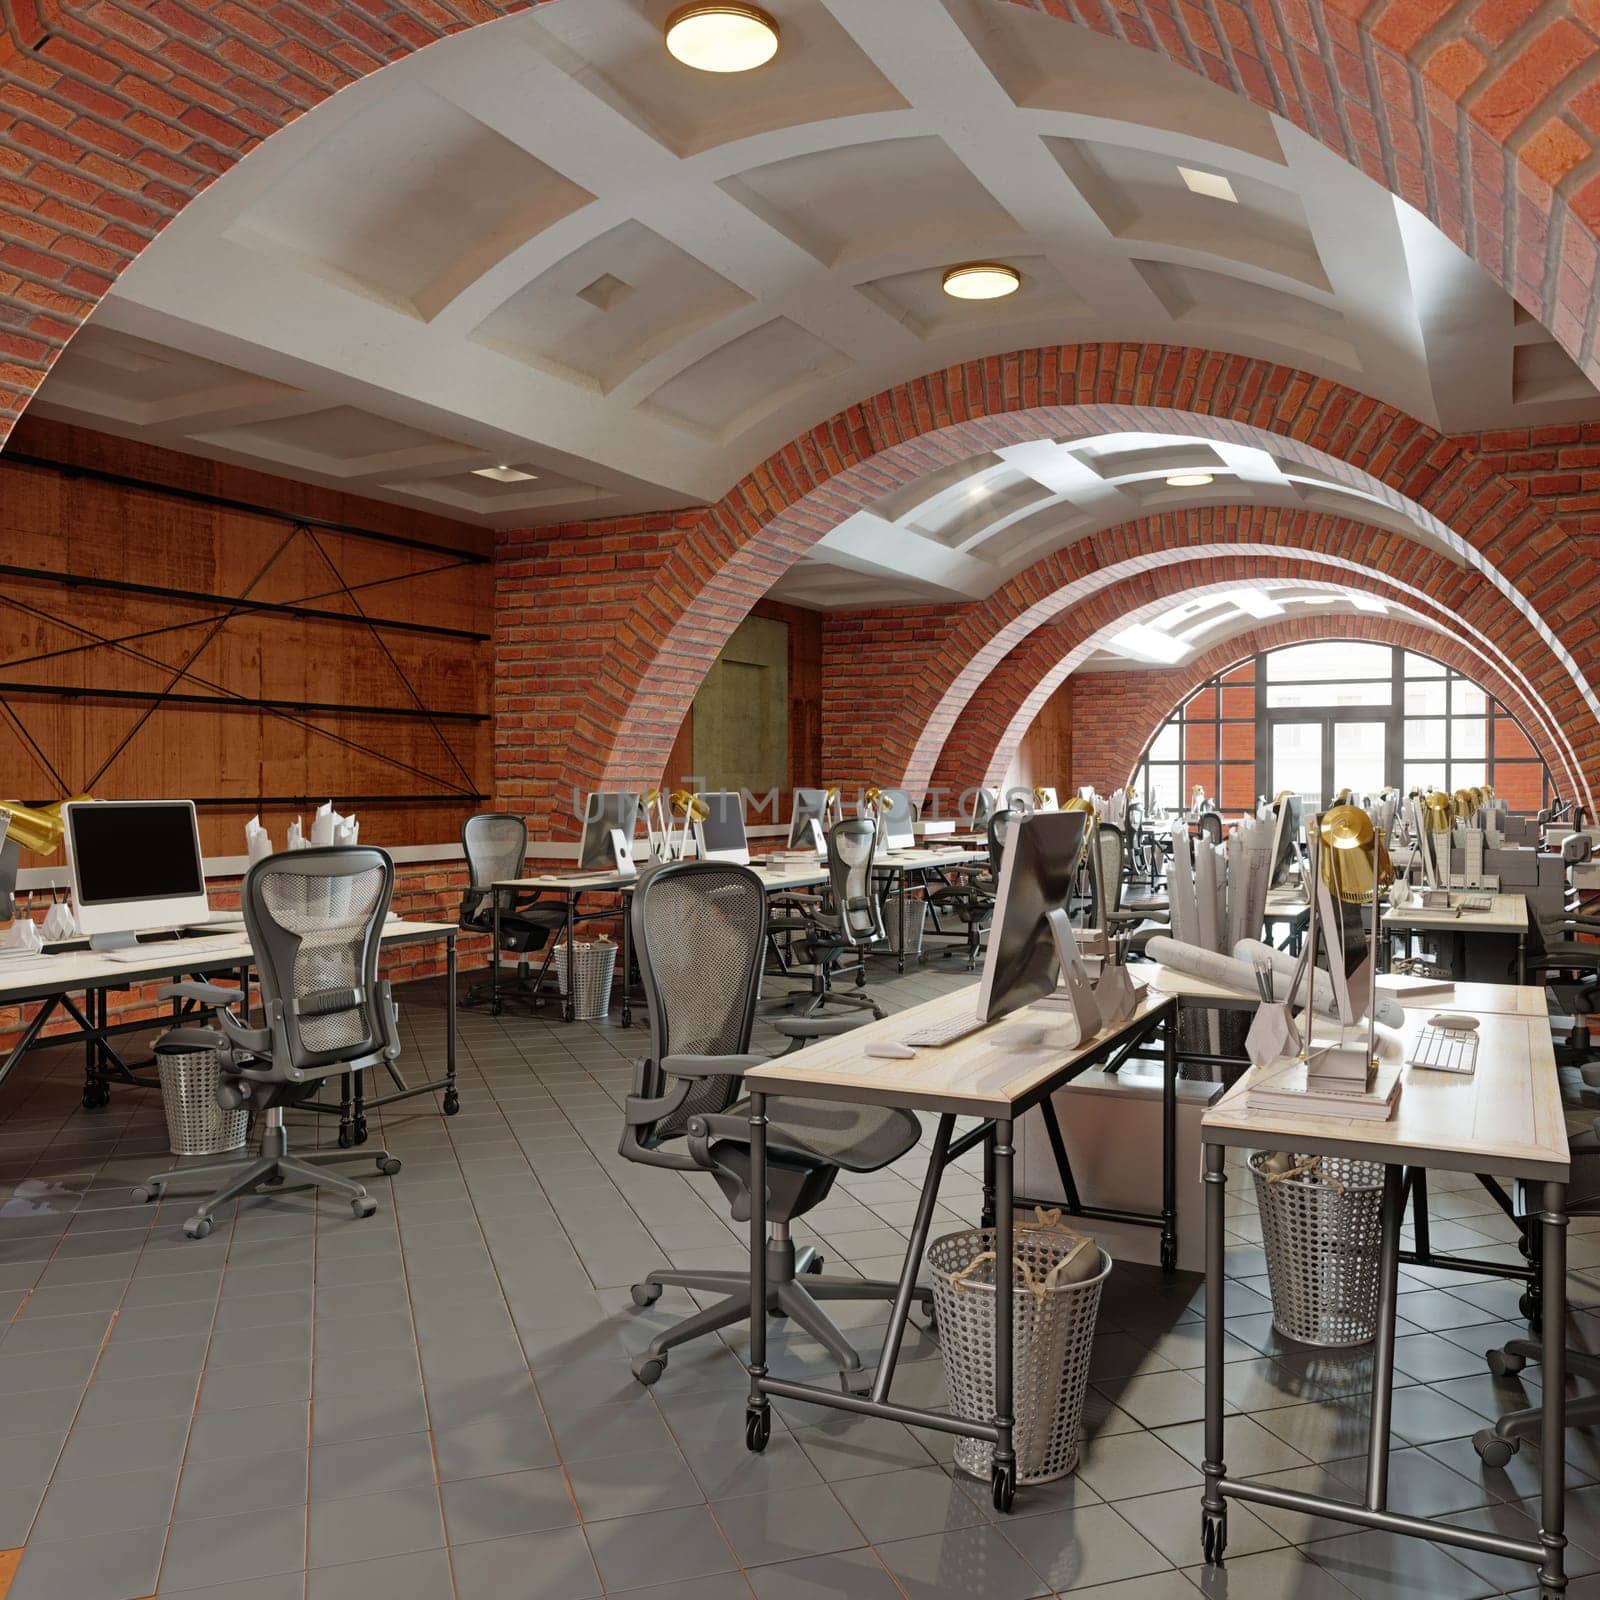 Interior of a modern office with brick walls and floor. 3d rendering